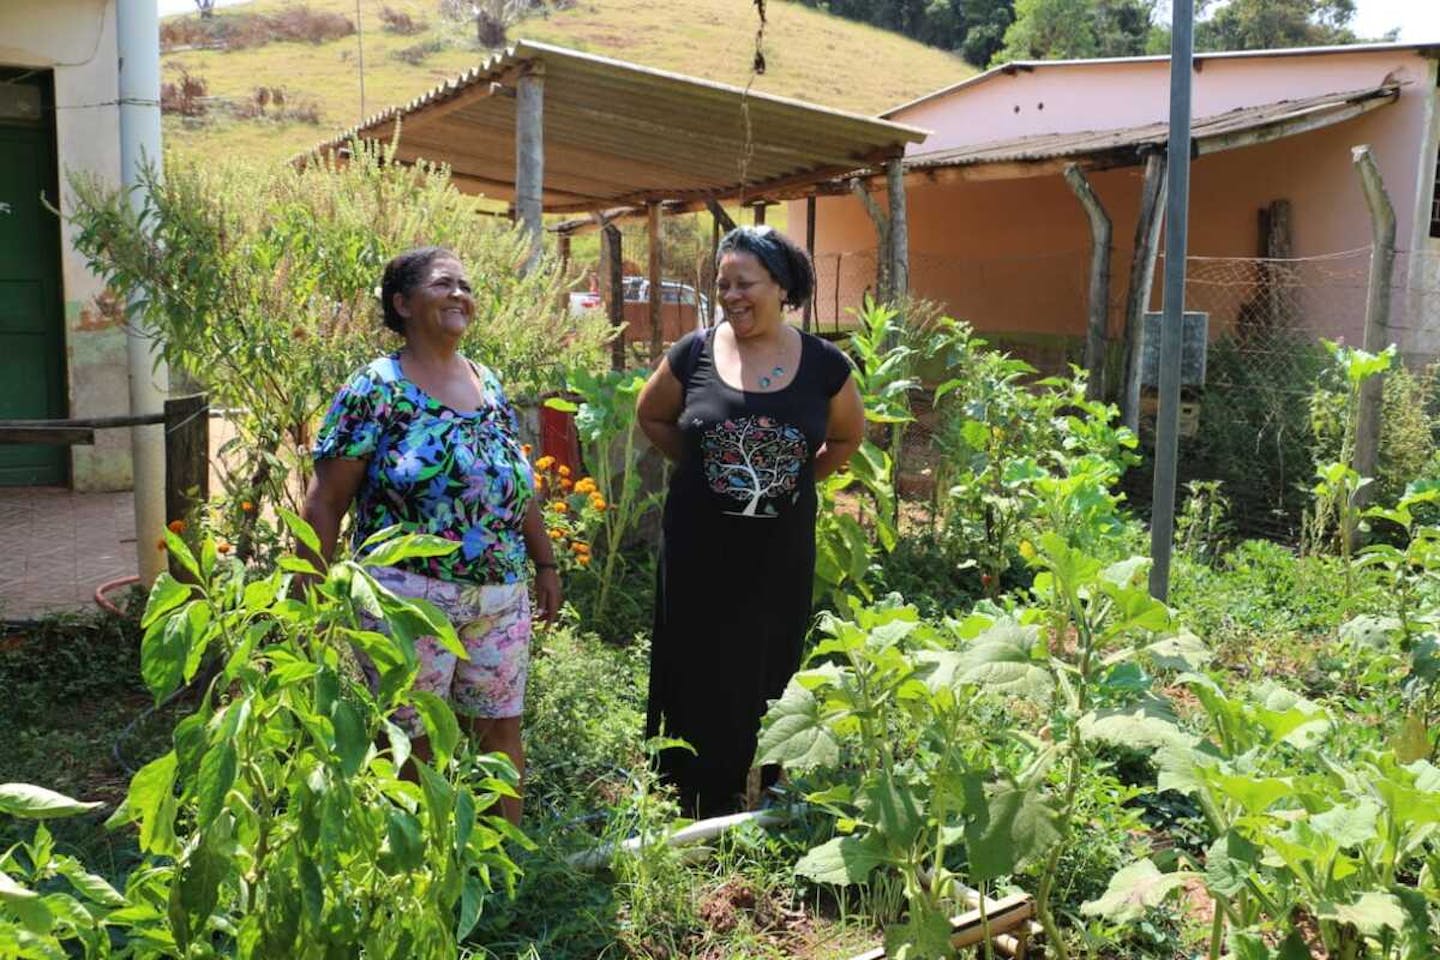 How a booklet transformed women’s agroecological production in Brazil